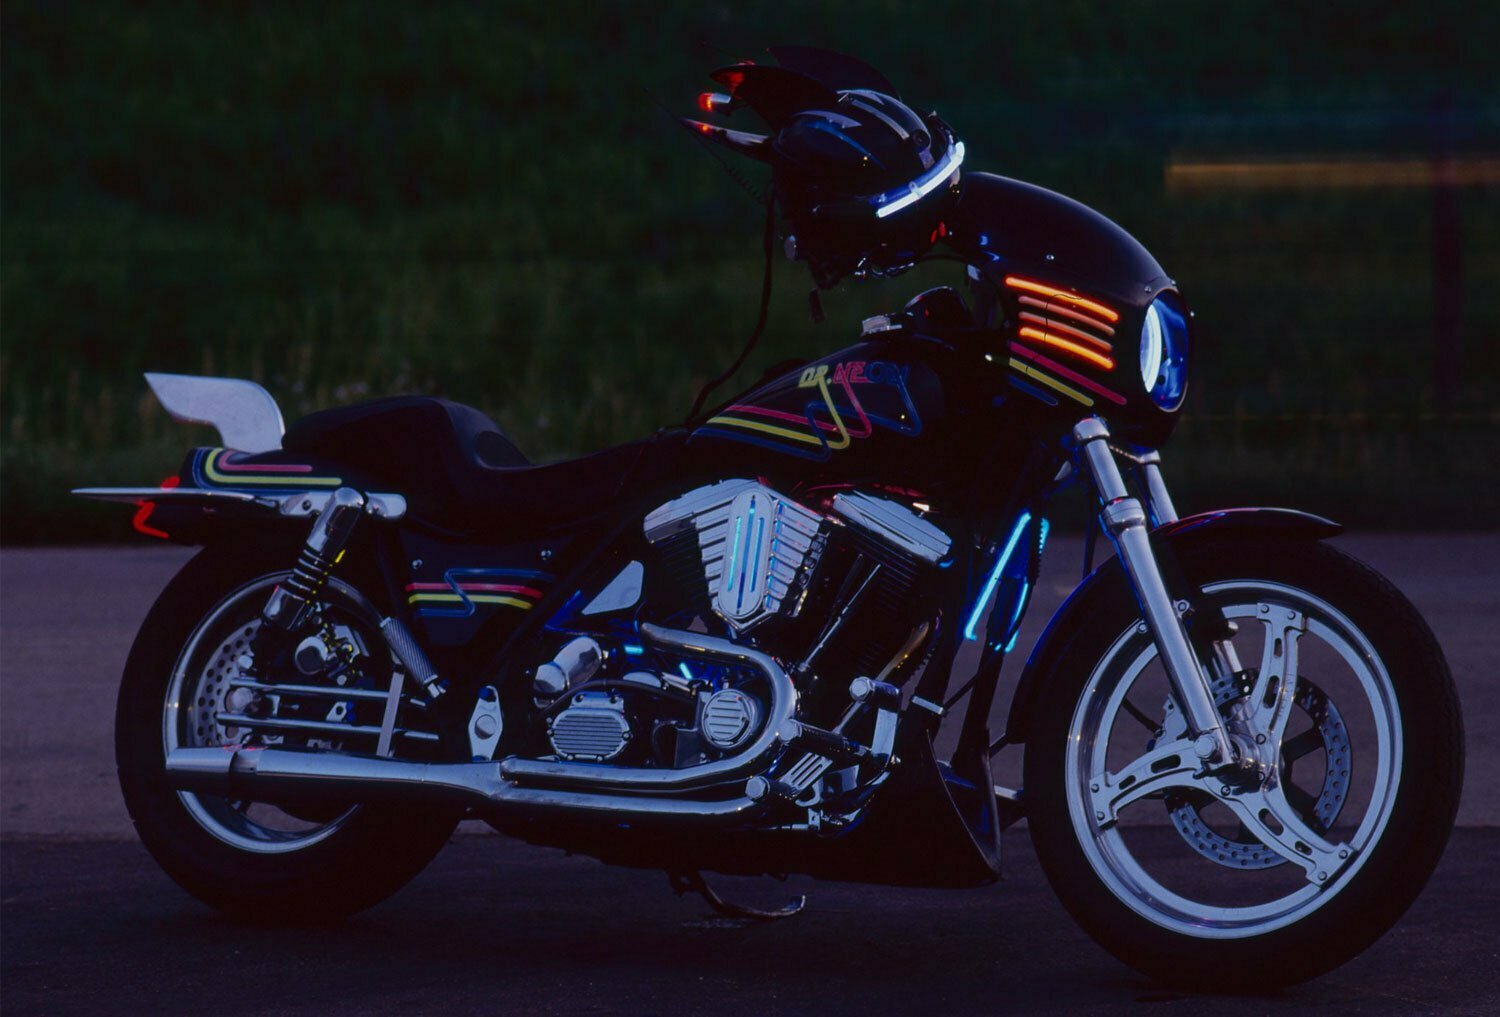 Neon-accented 1990 FXR nicknamed after its owner, Dr. Neon.